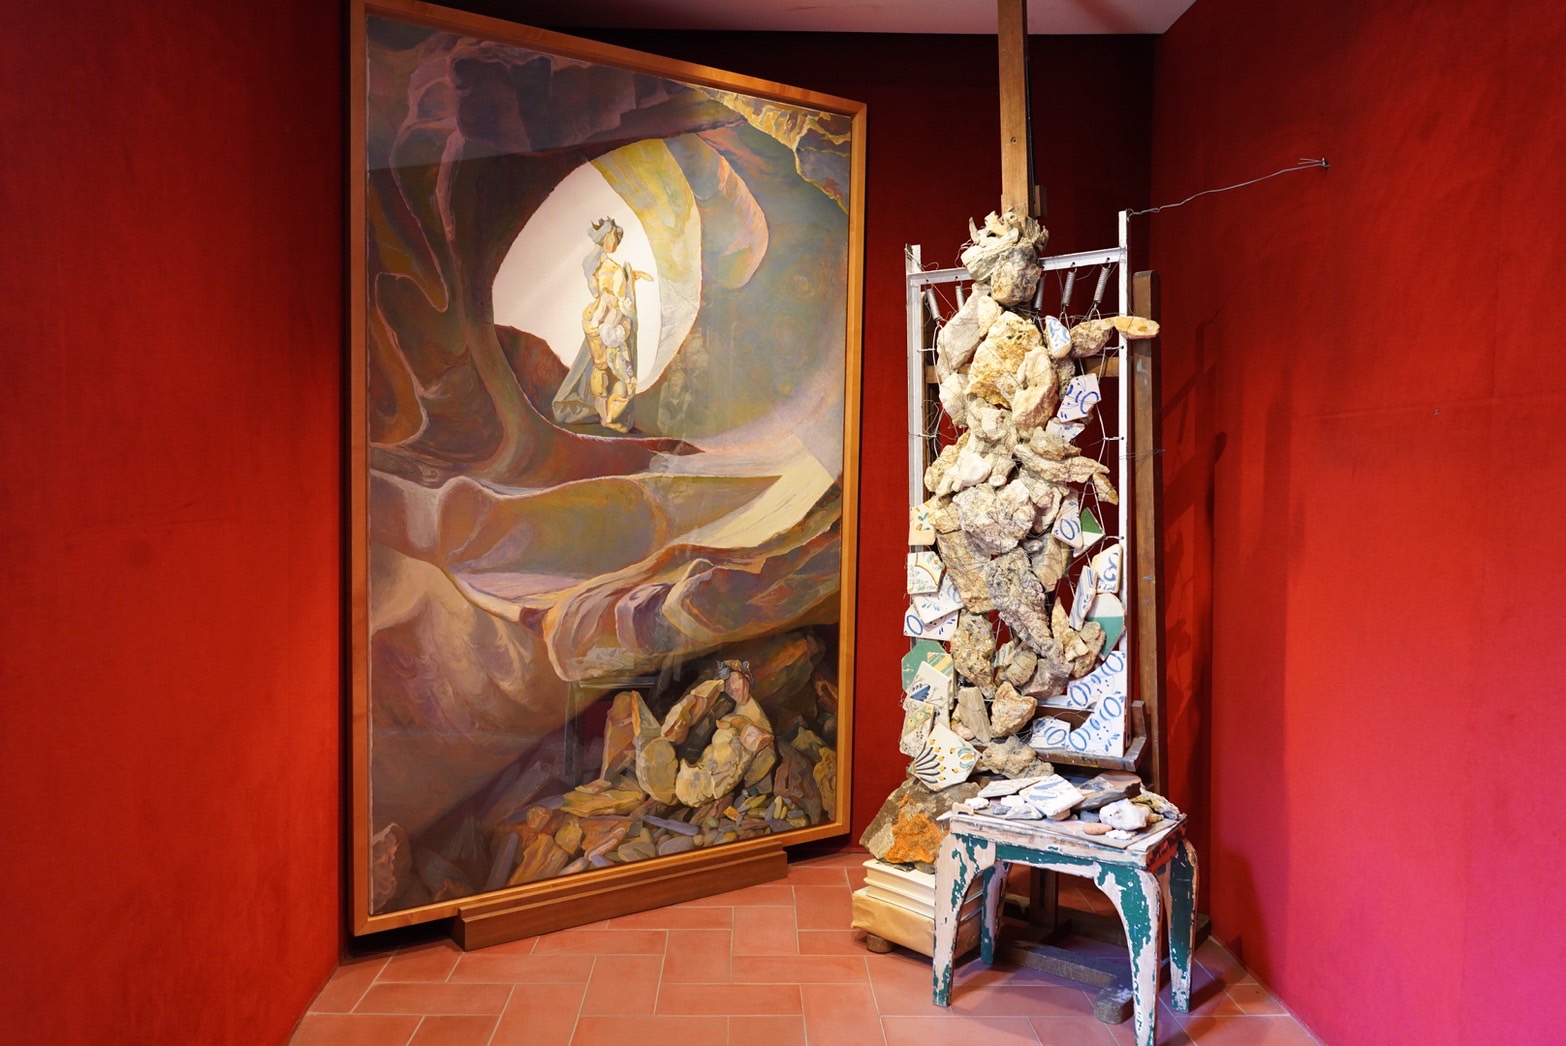 The art collection of Salvador Dalí (Photo Credit: Anya C.)